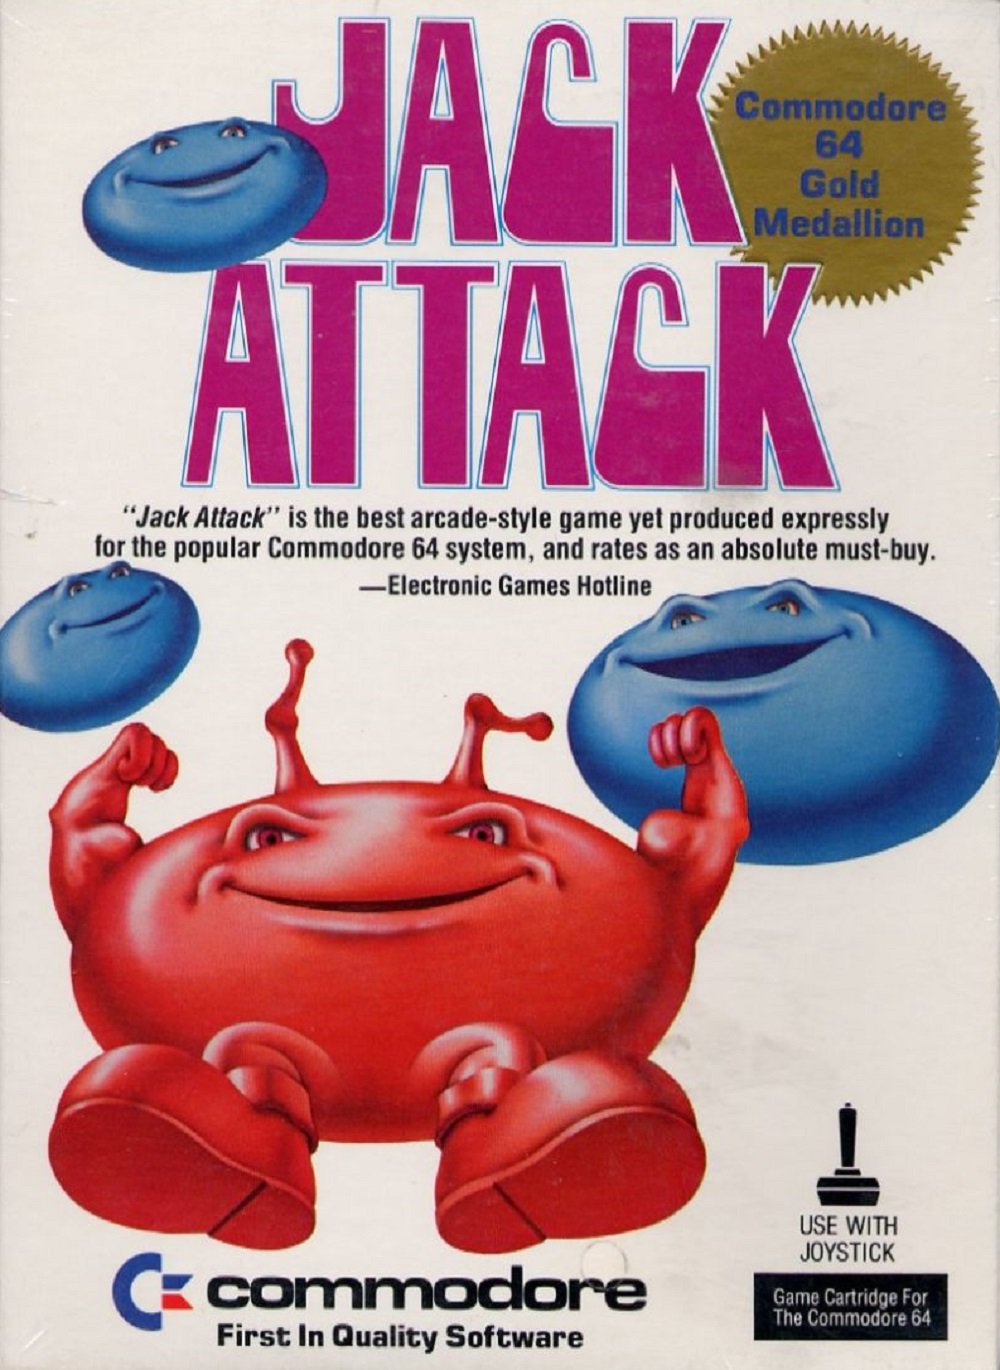 Image of Jack Attack